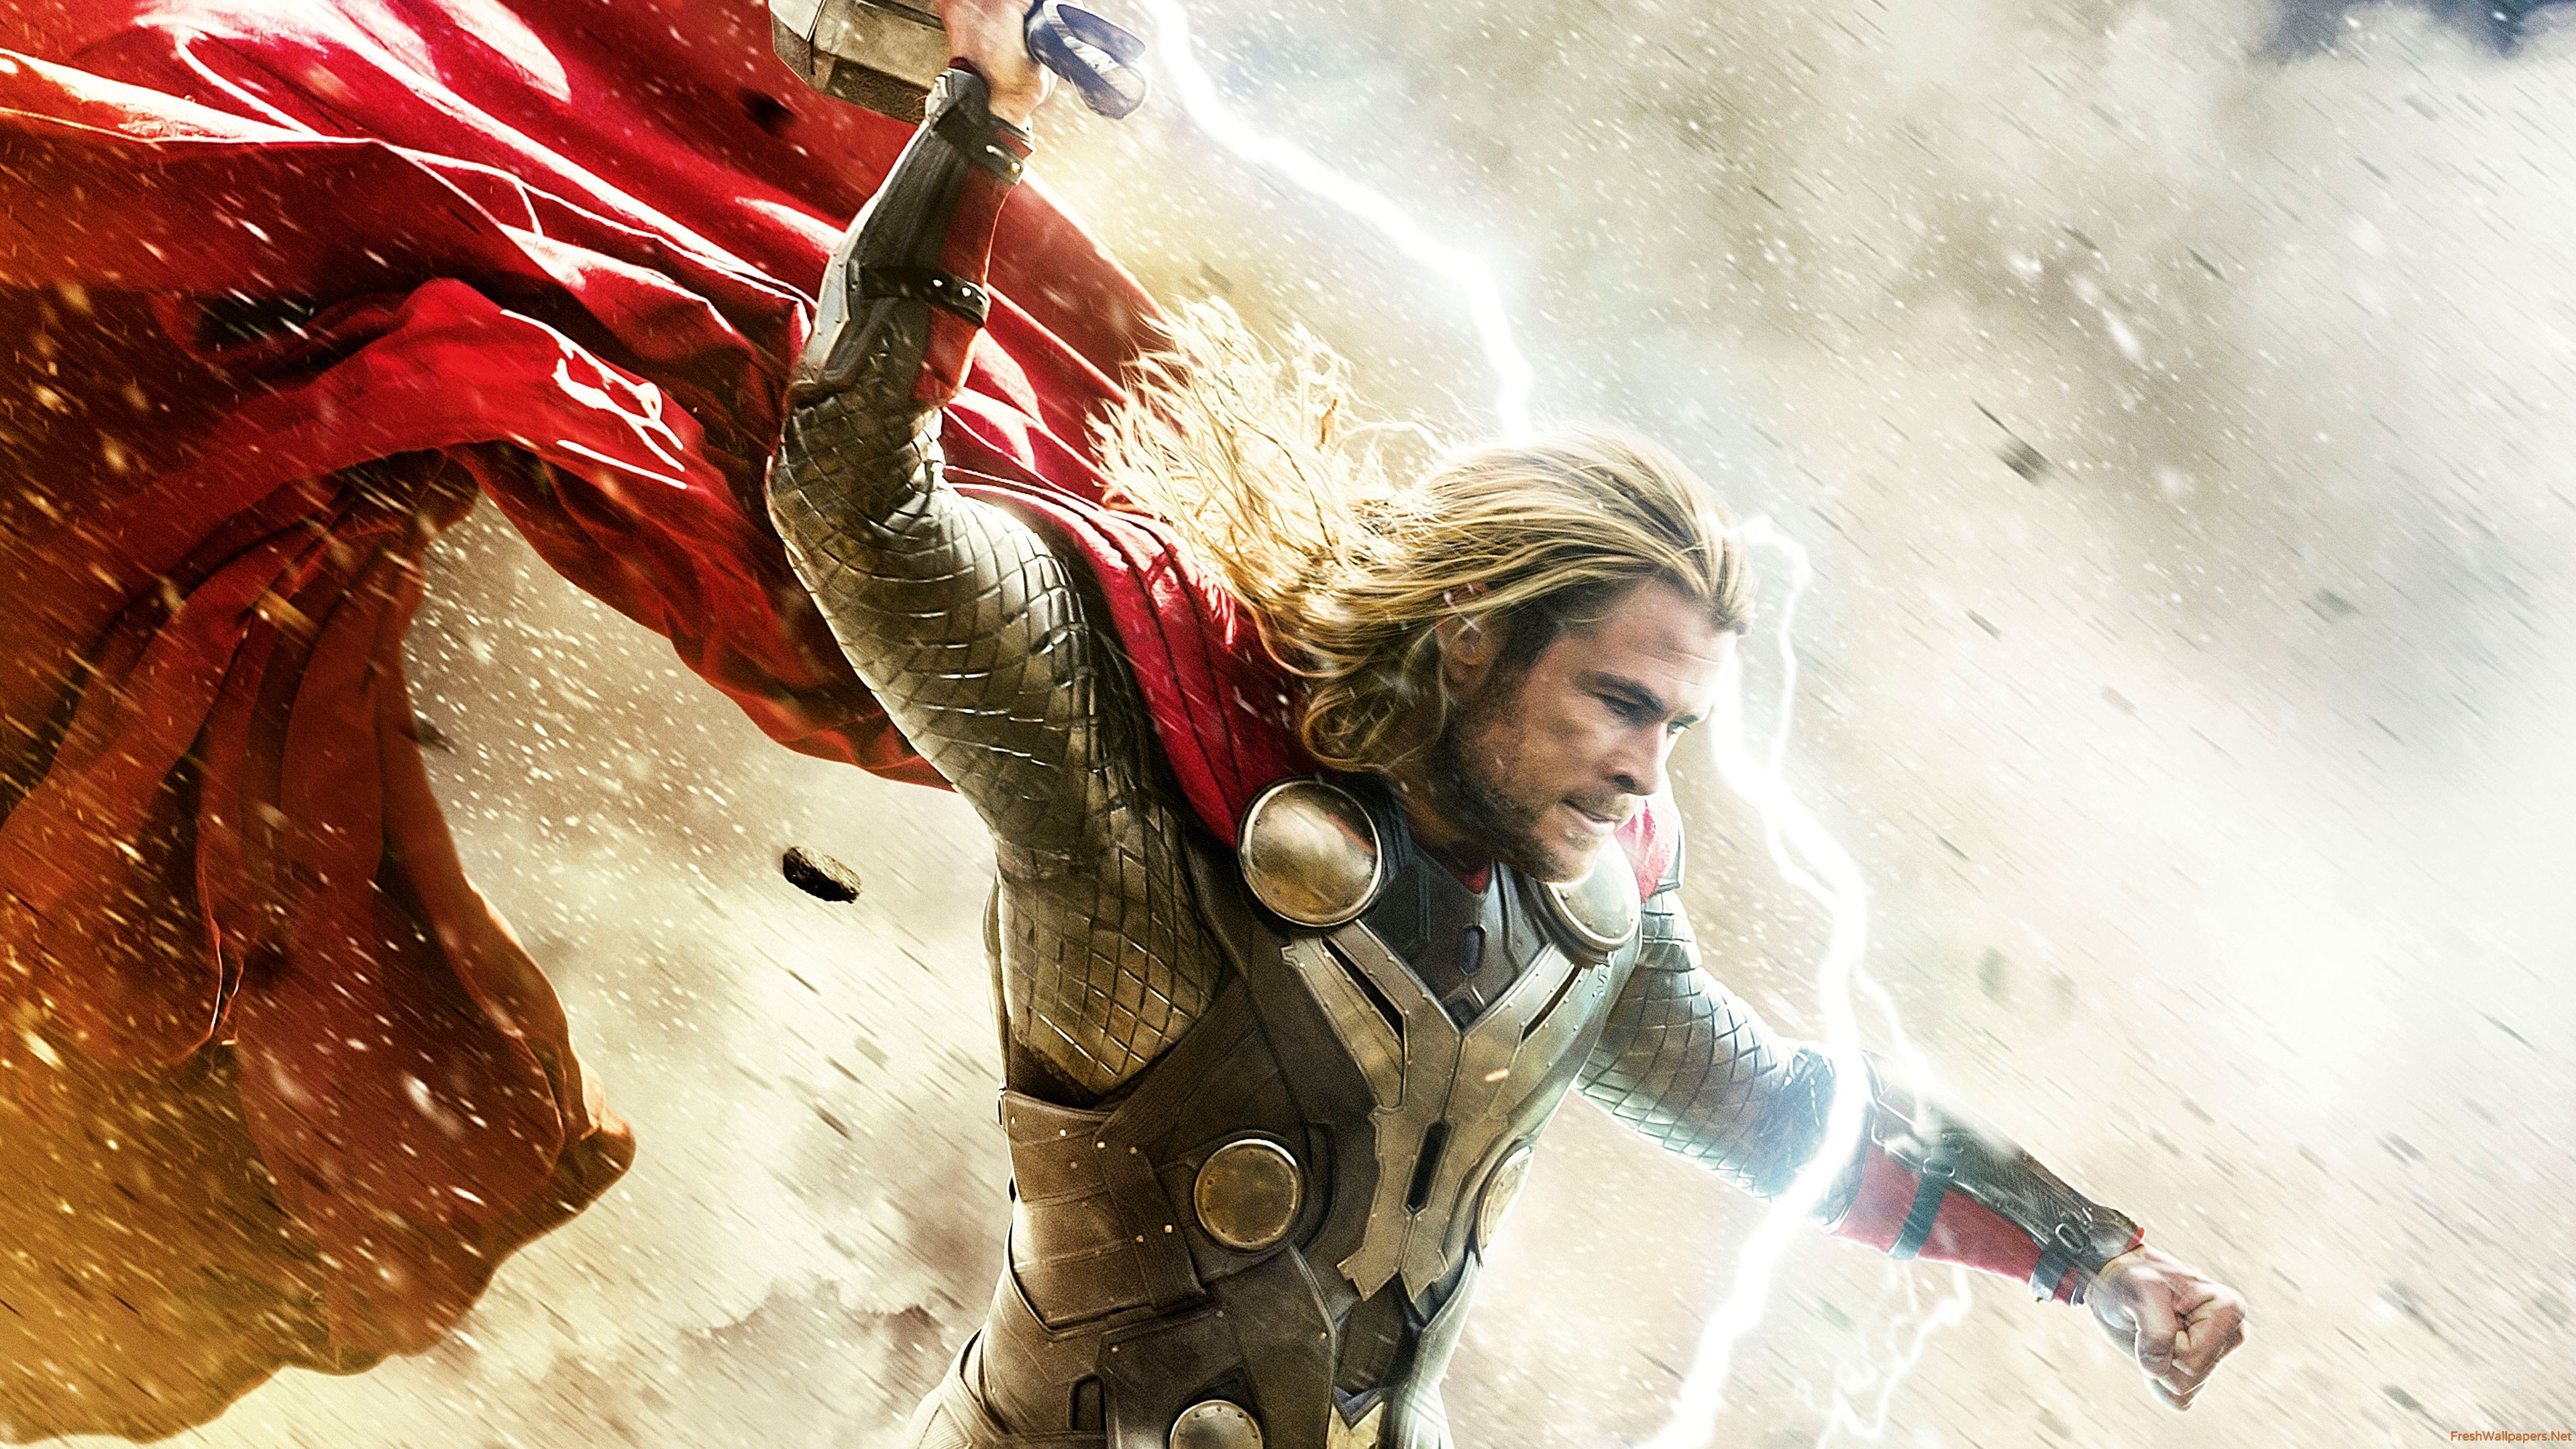 Thor wallpaper ·① Download free awesome HD backgrounds for desktop and